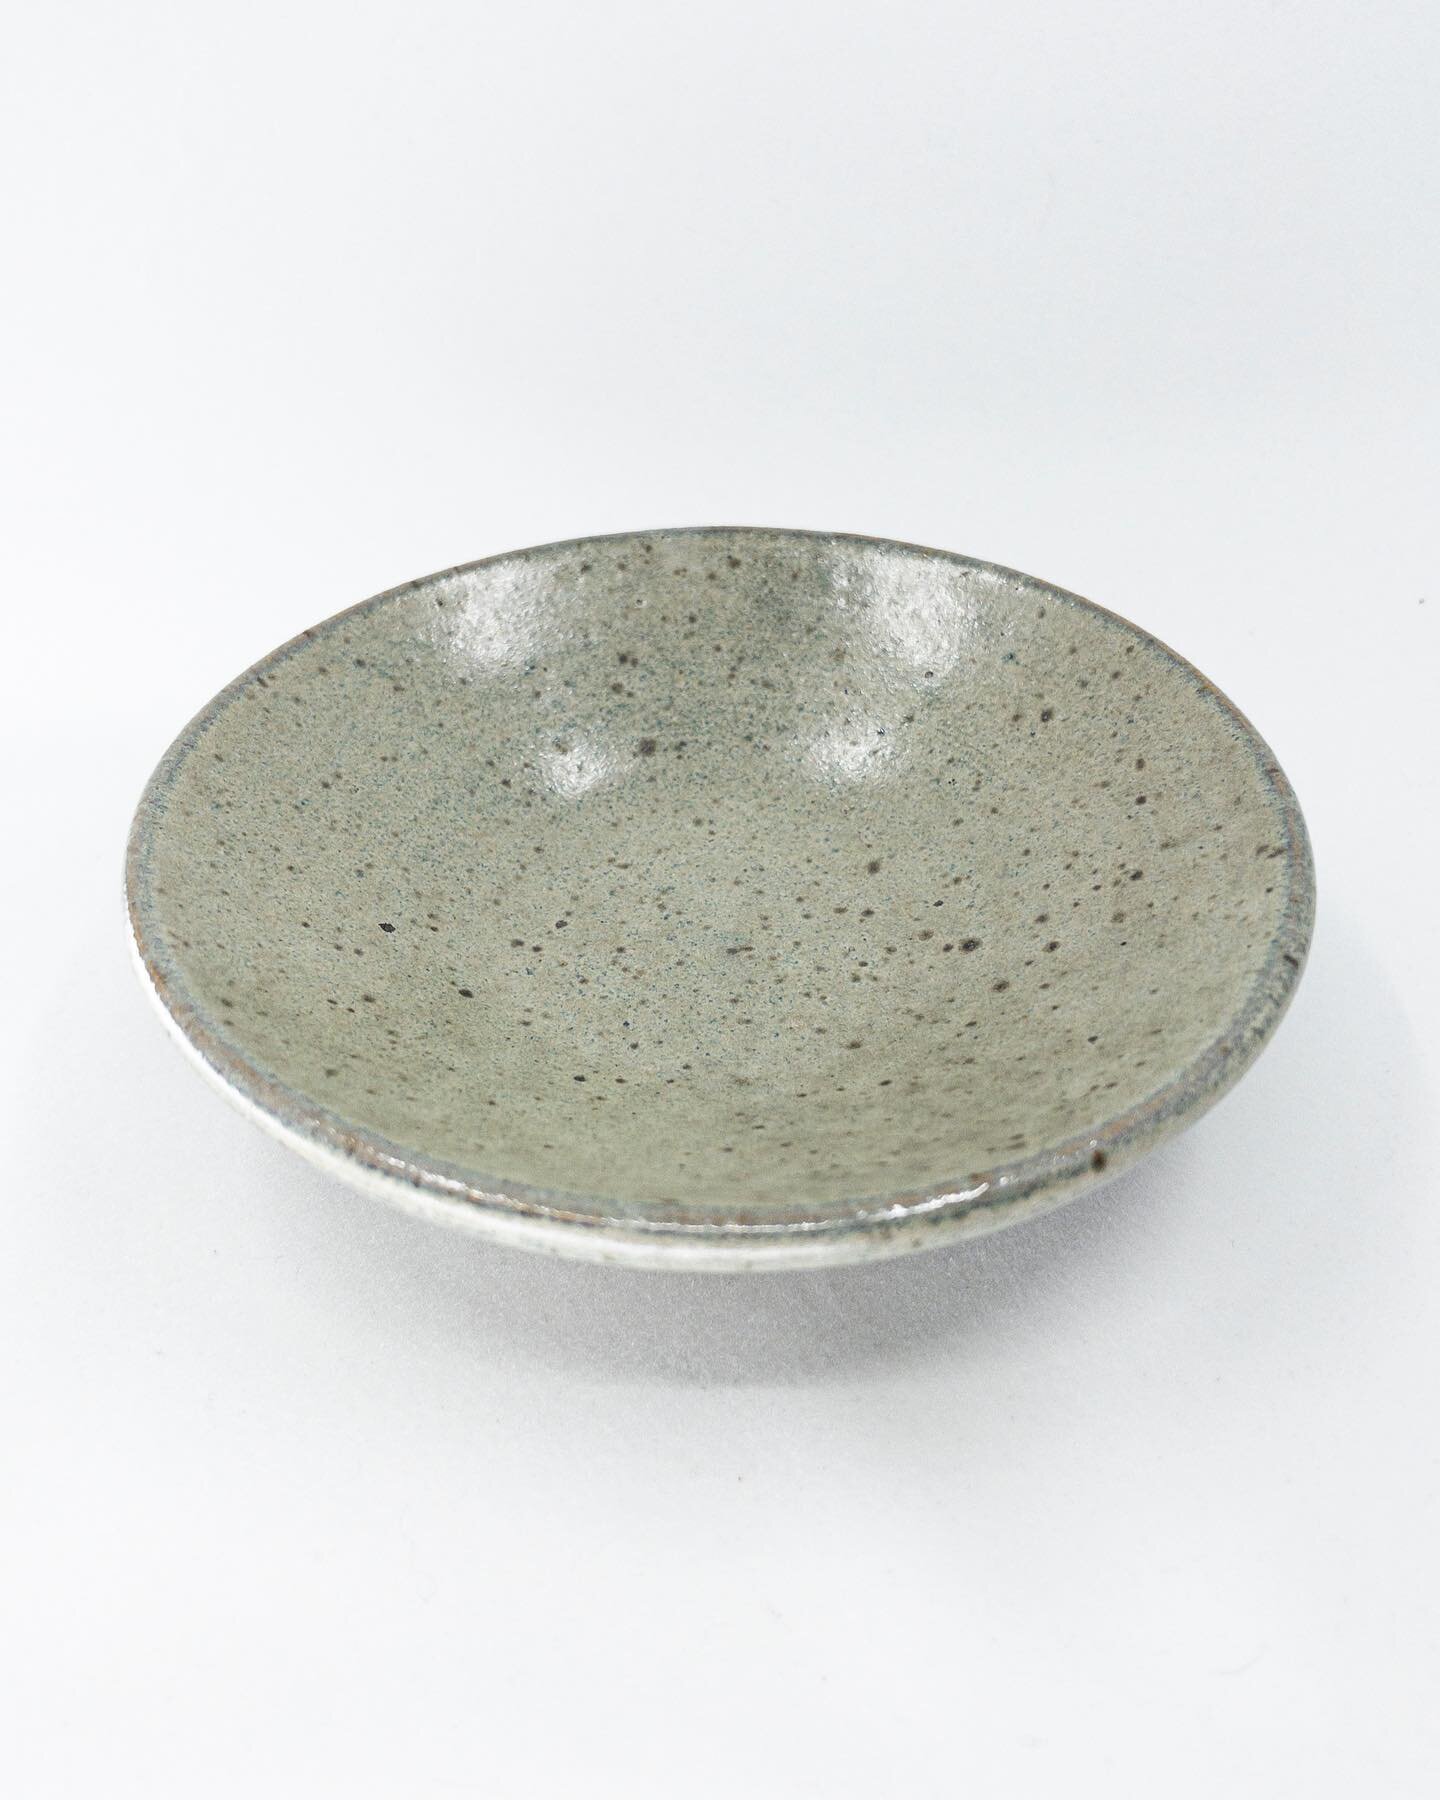 Small green dish. Made from reclaimed stoneware with a green, reduction fired to cone 10. This little bowl is one of the smallest and simplest things I&rsquo;ve made recently, but it&rsquo;s one of my favorites.
.
.
.
.
.
#pottery #ceramics #handmade